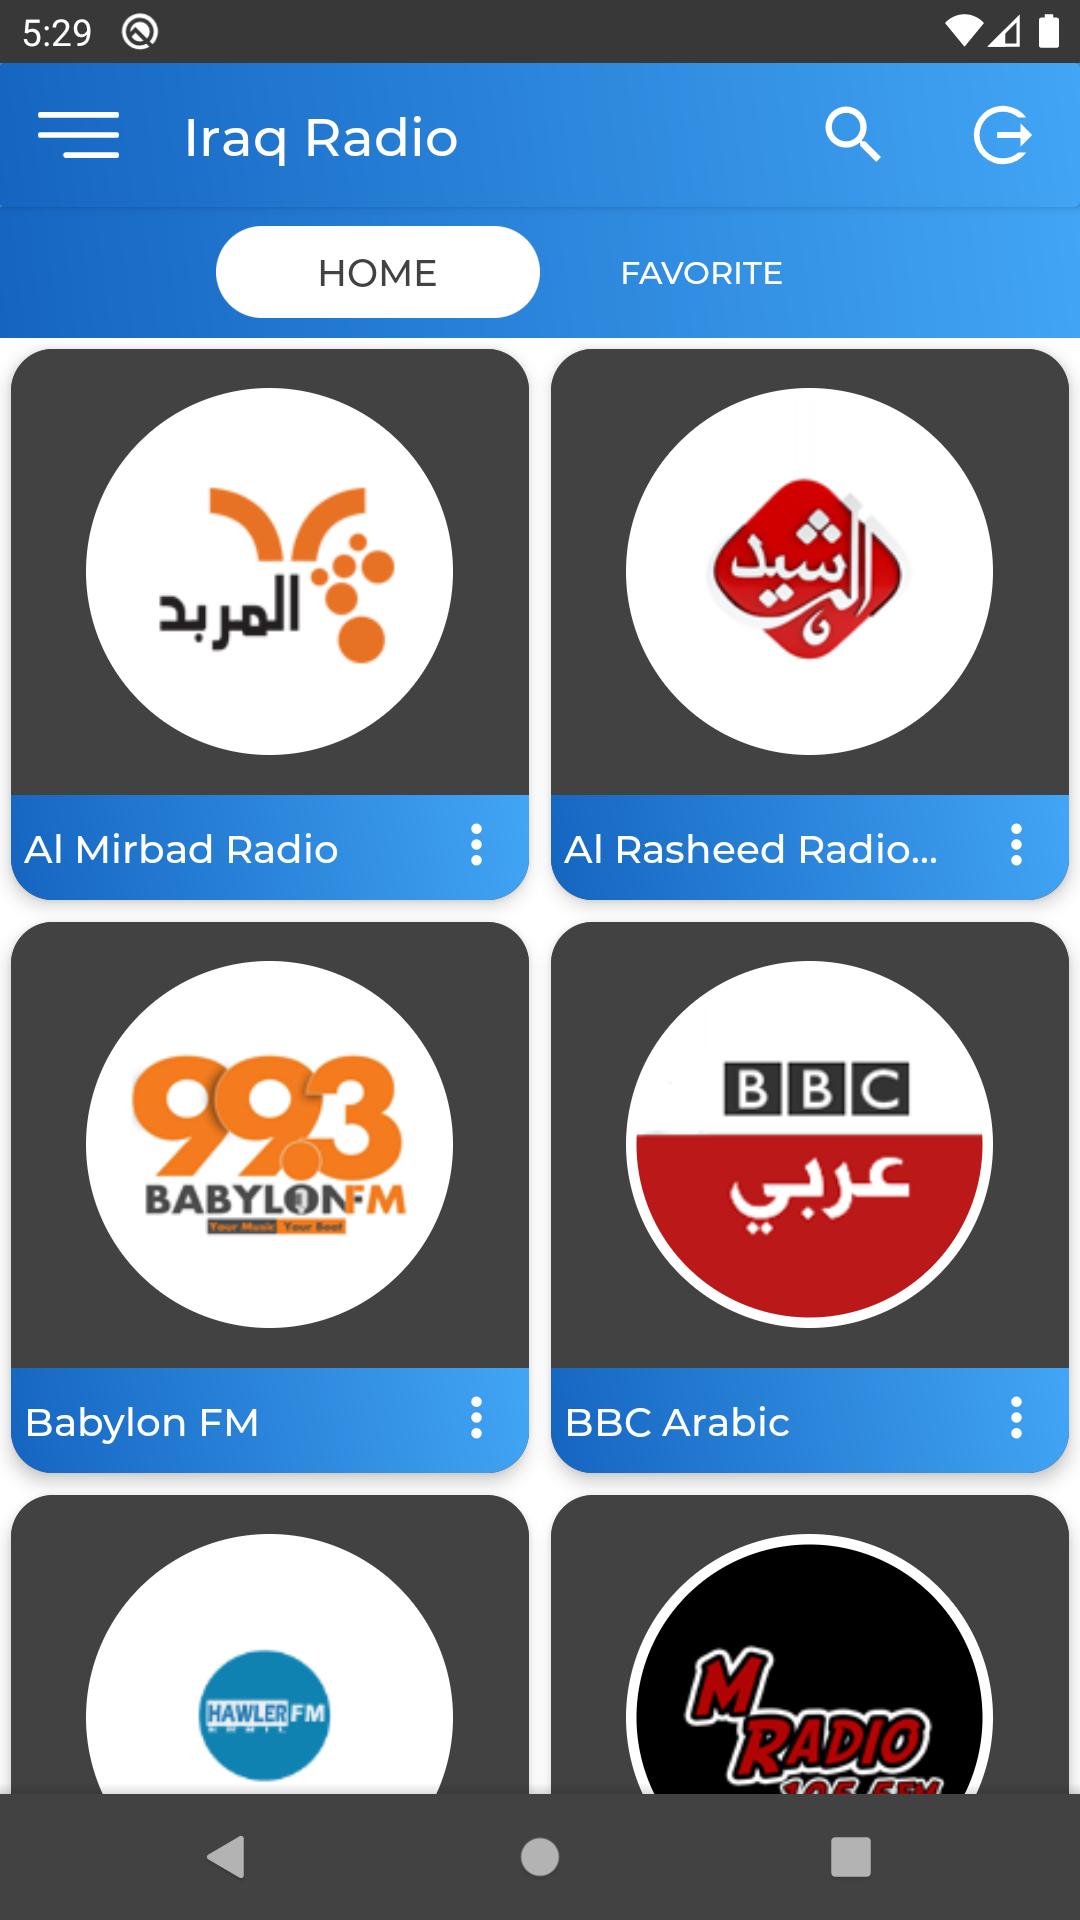 Iraq Radio for Android - APK Download